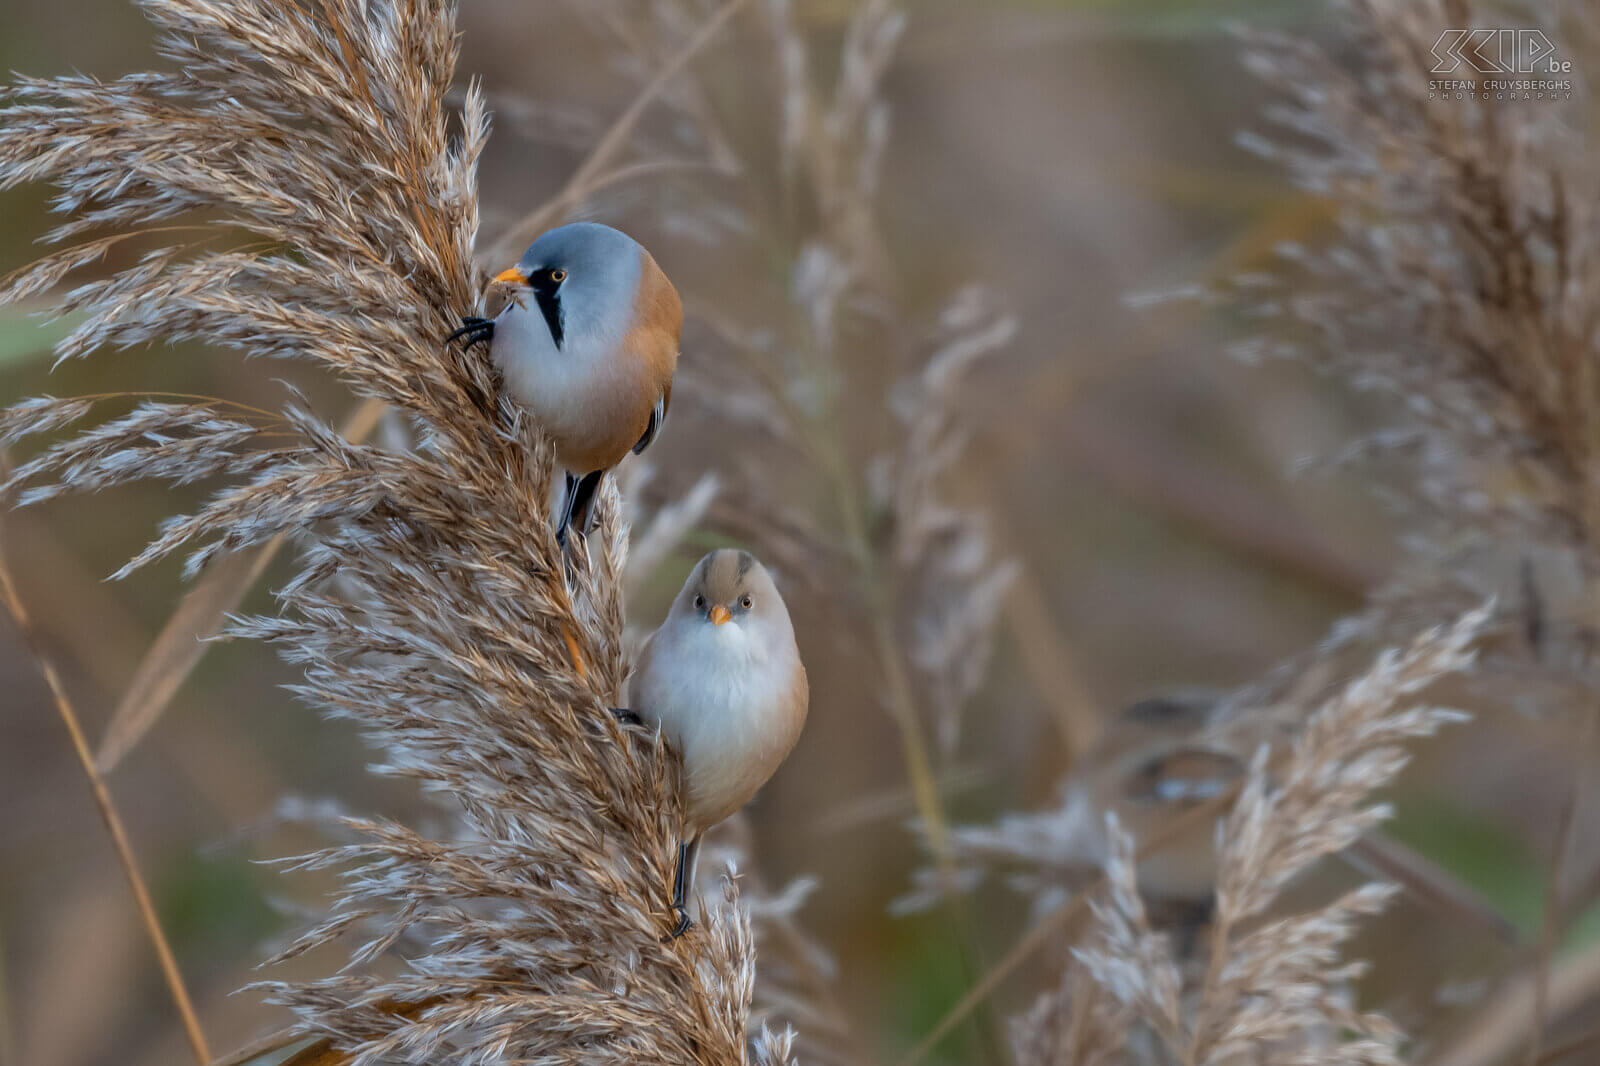 Bearded readling The bearded reedling can only be found in reed fields, they are quite social and are usually seen in groups of up to several dozen birds. The adult male has characteristic black 'moustache'. Stefan Cruysberghs